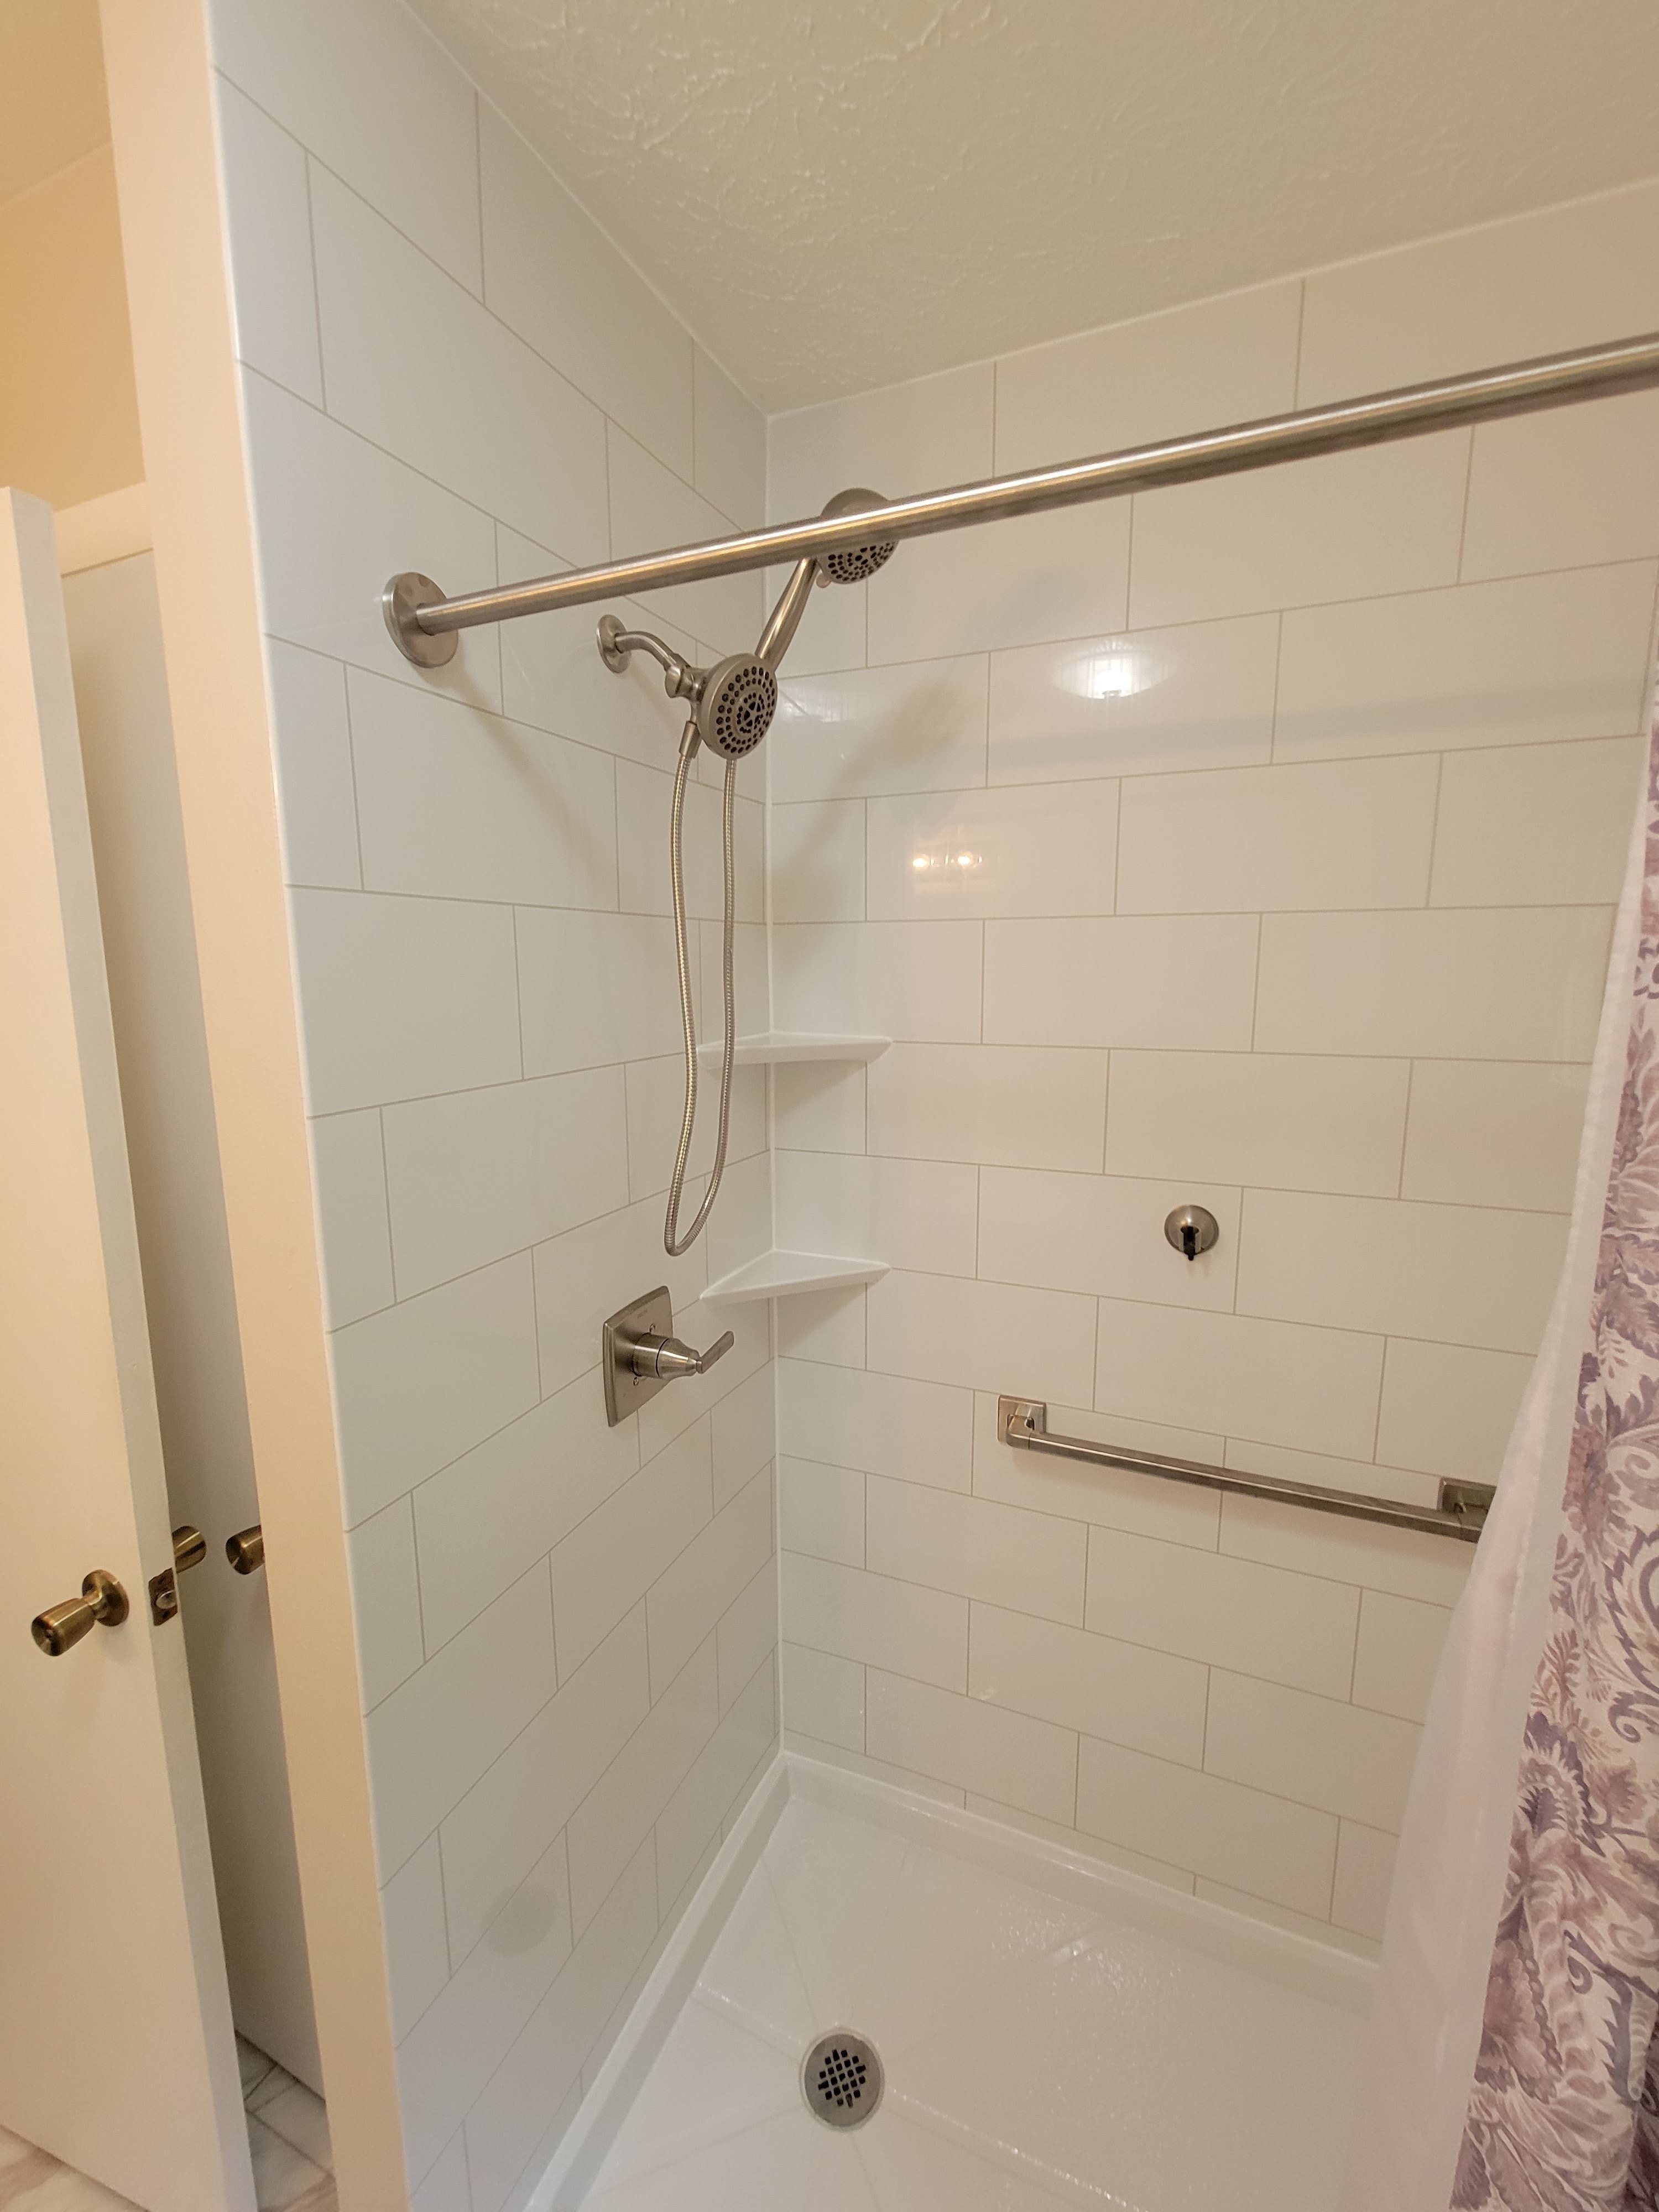 New shower with chrome features